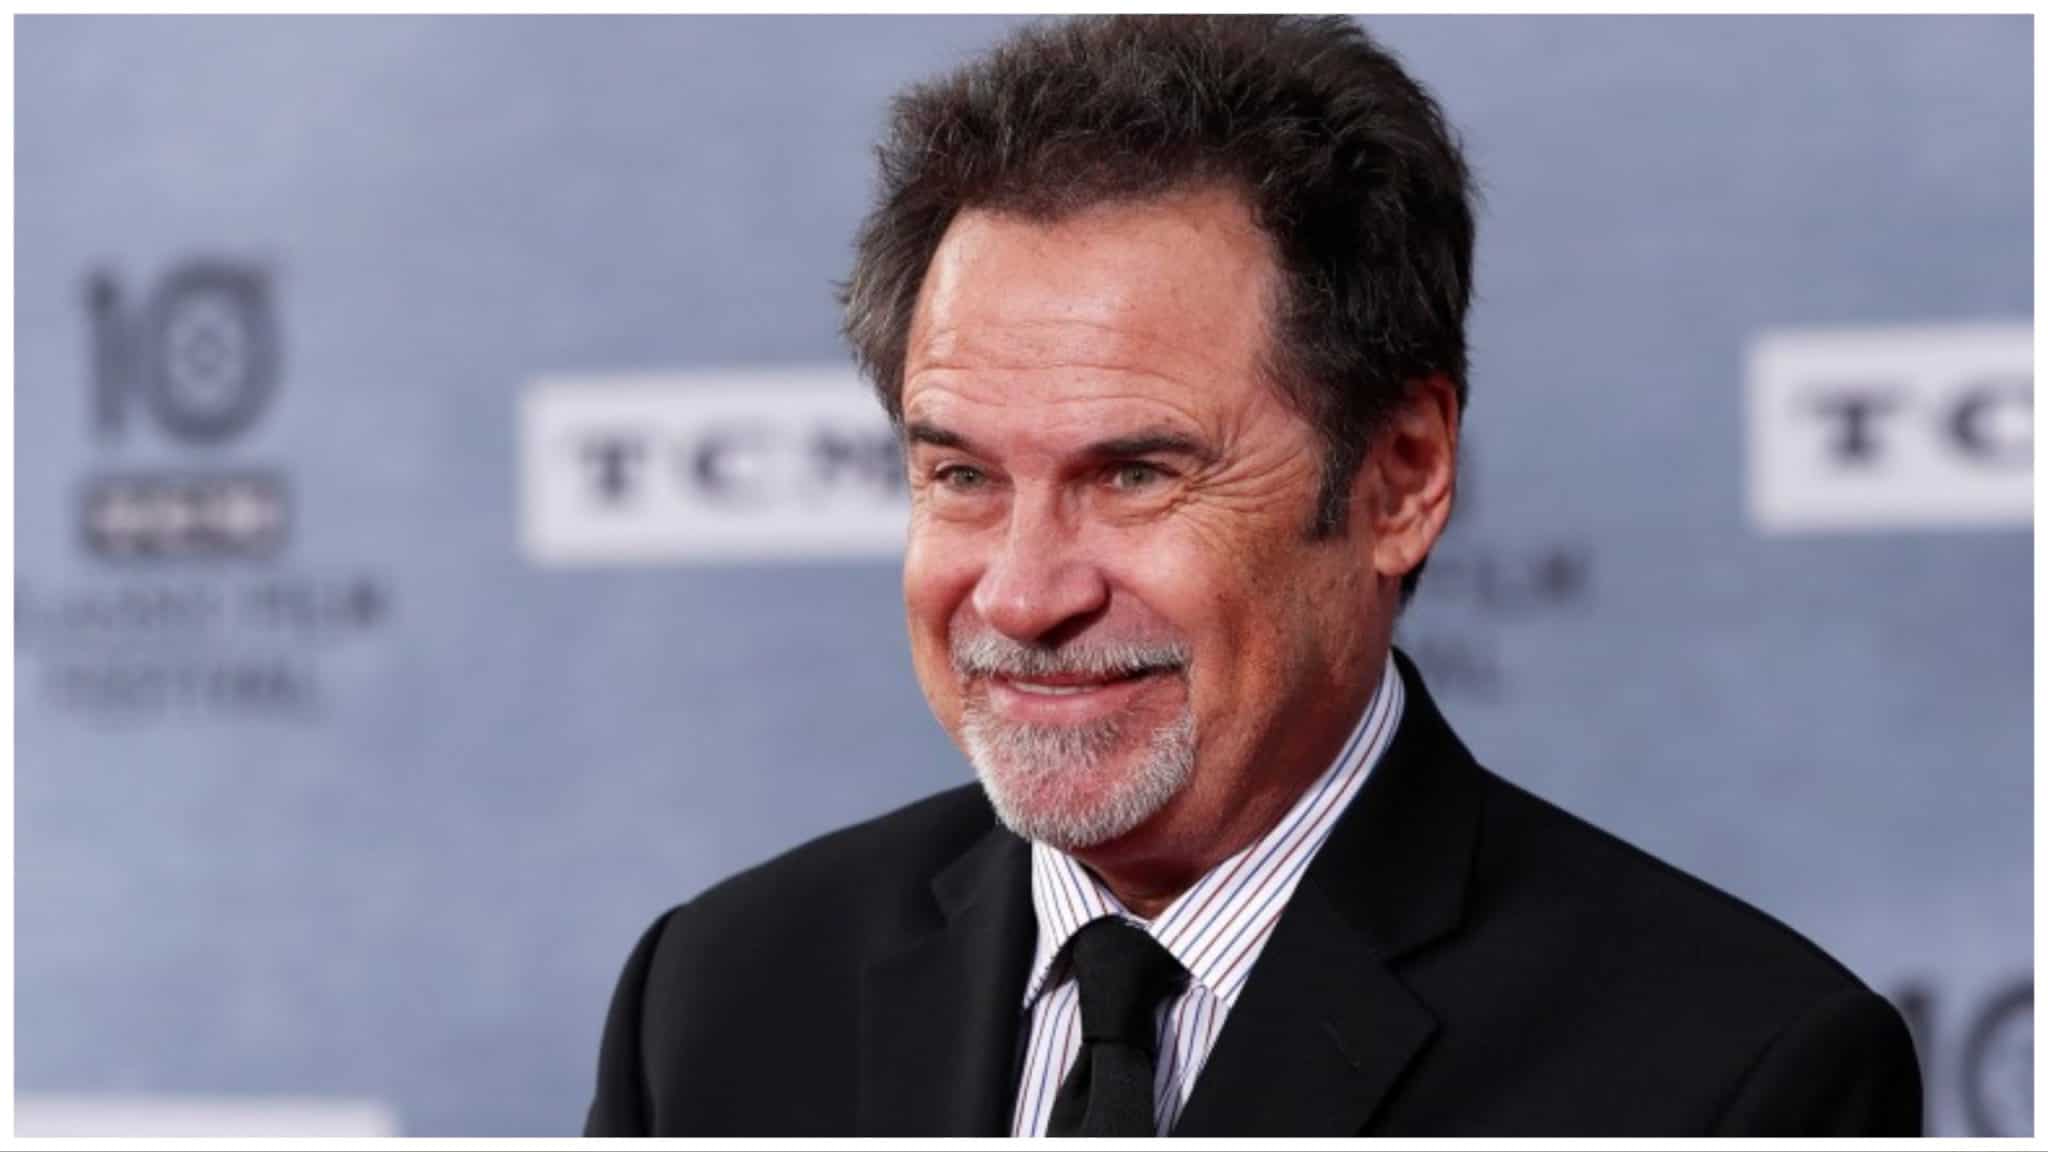 What Happened To Dennis Miller? The SNL Comedian's Fall From Fame